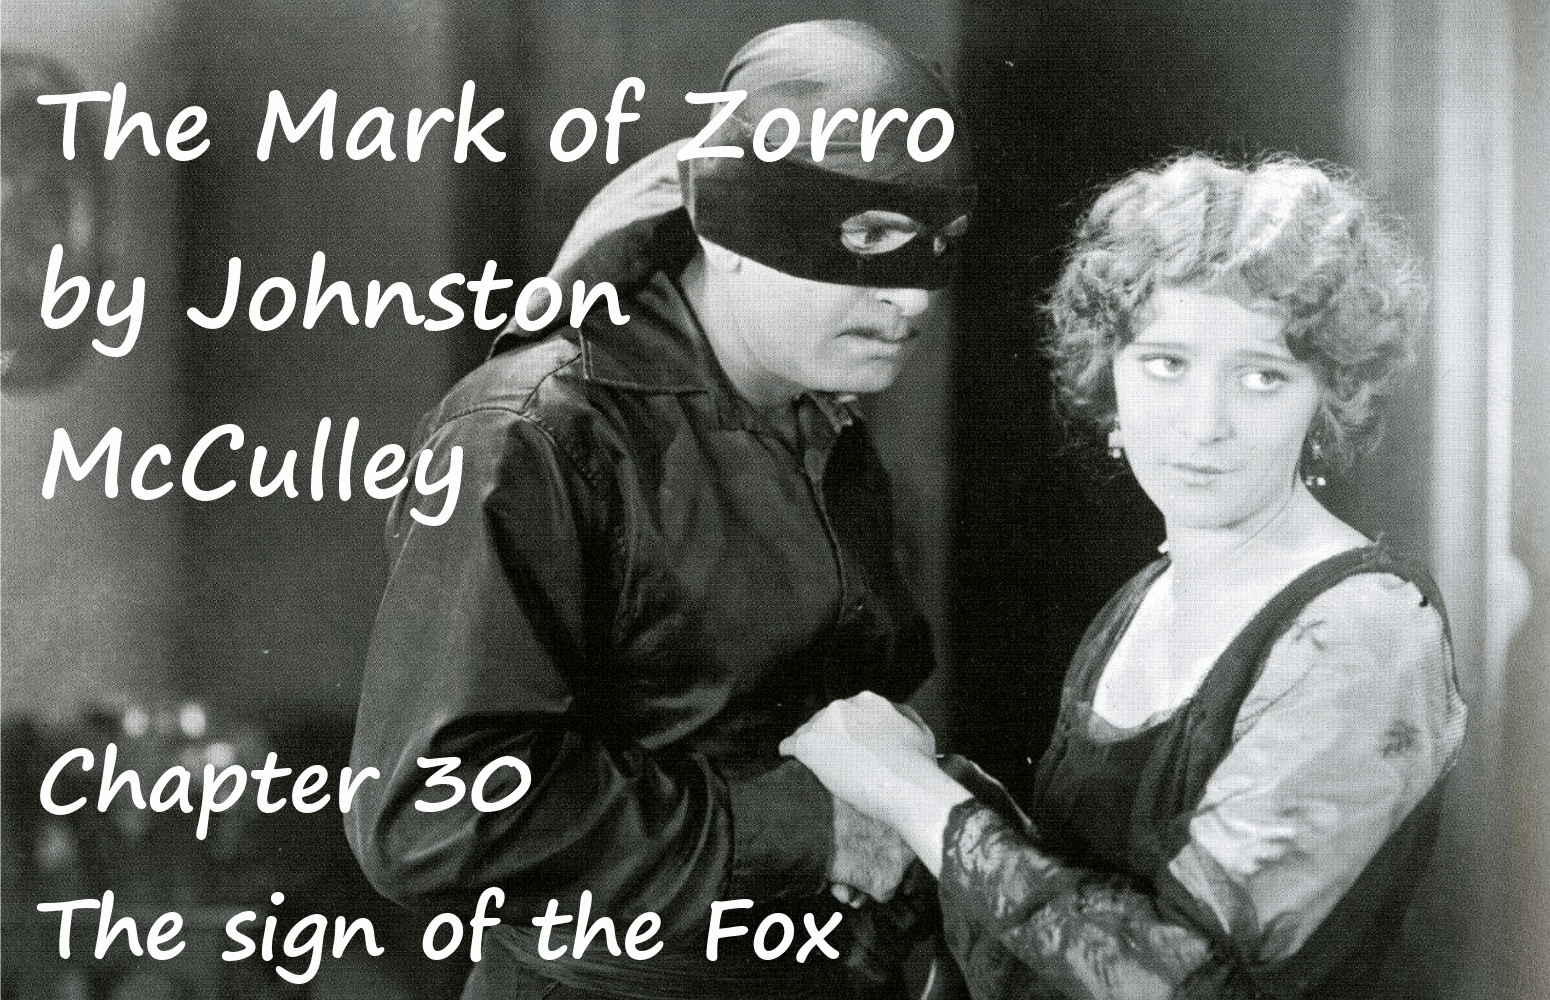 The Mark of Zorro chapter 30 The sign of the Fox by Johnston McCulley